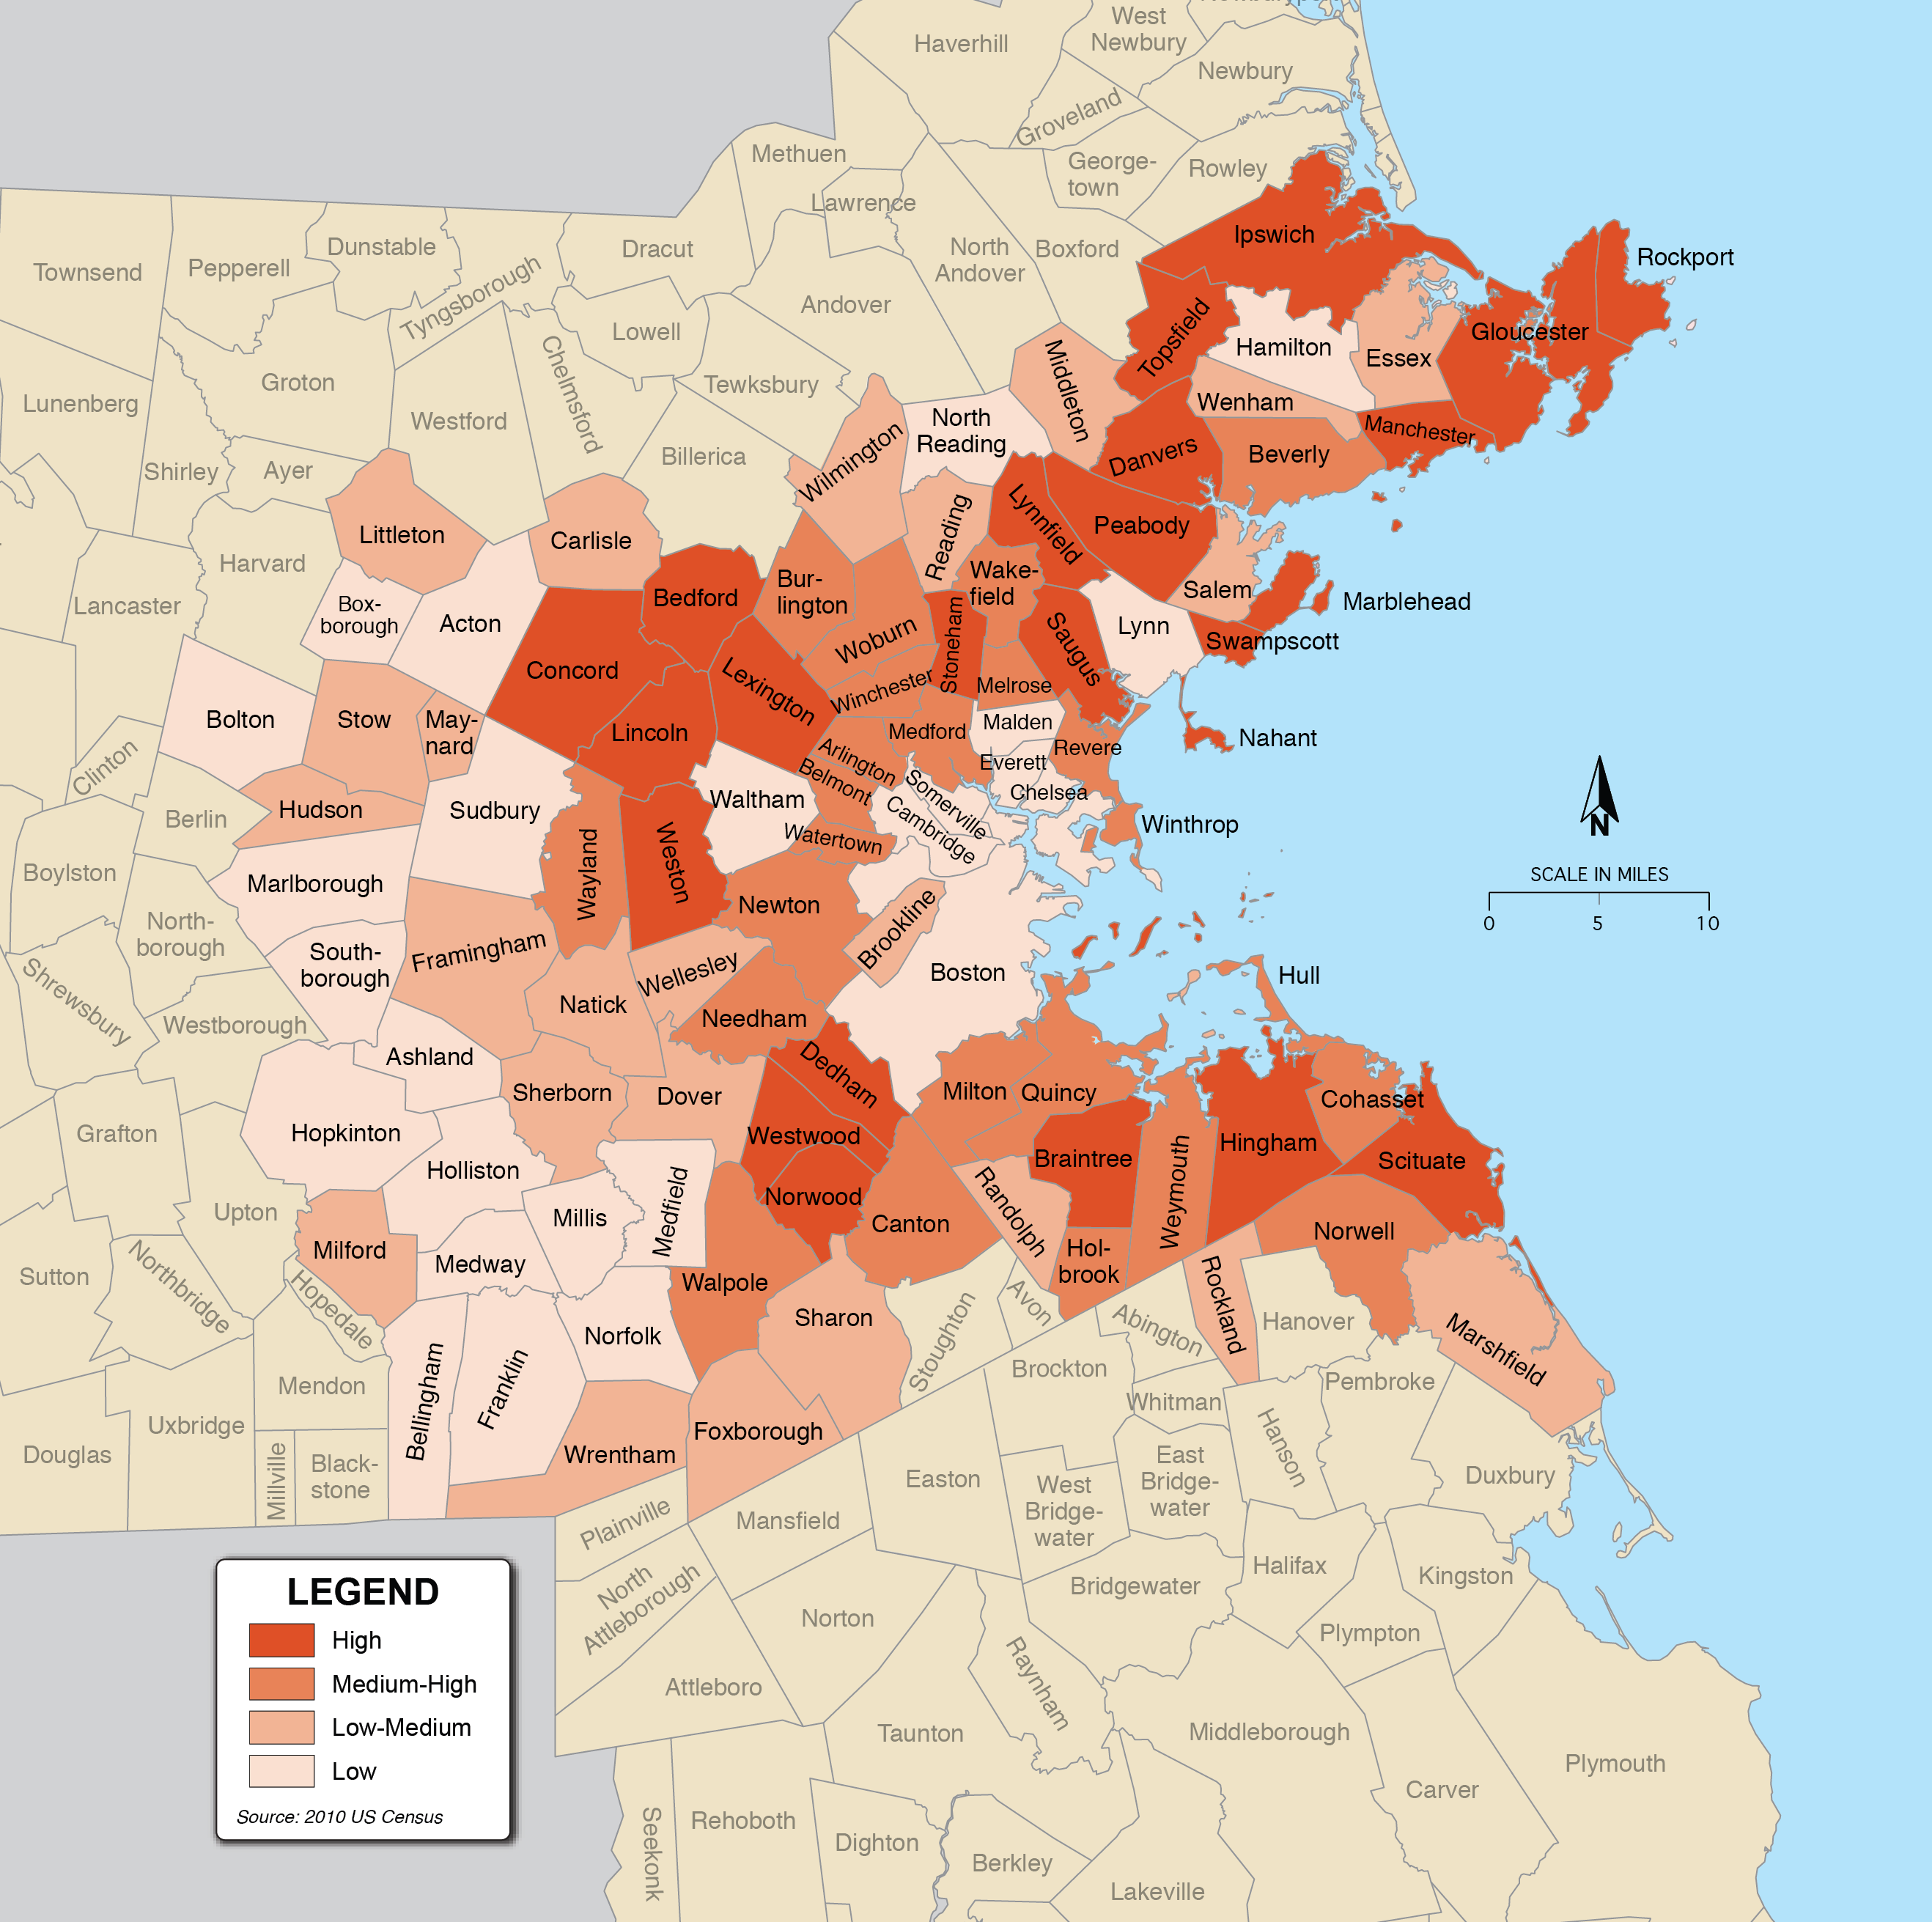 This map shows the share of the population ages 65 and older in the Boston region by municipality.